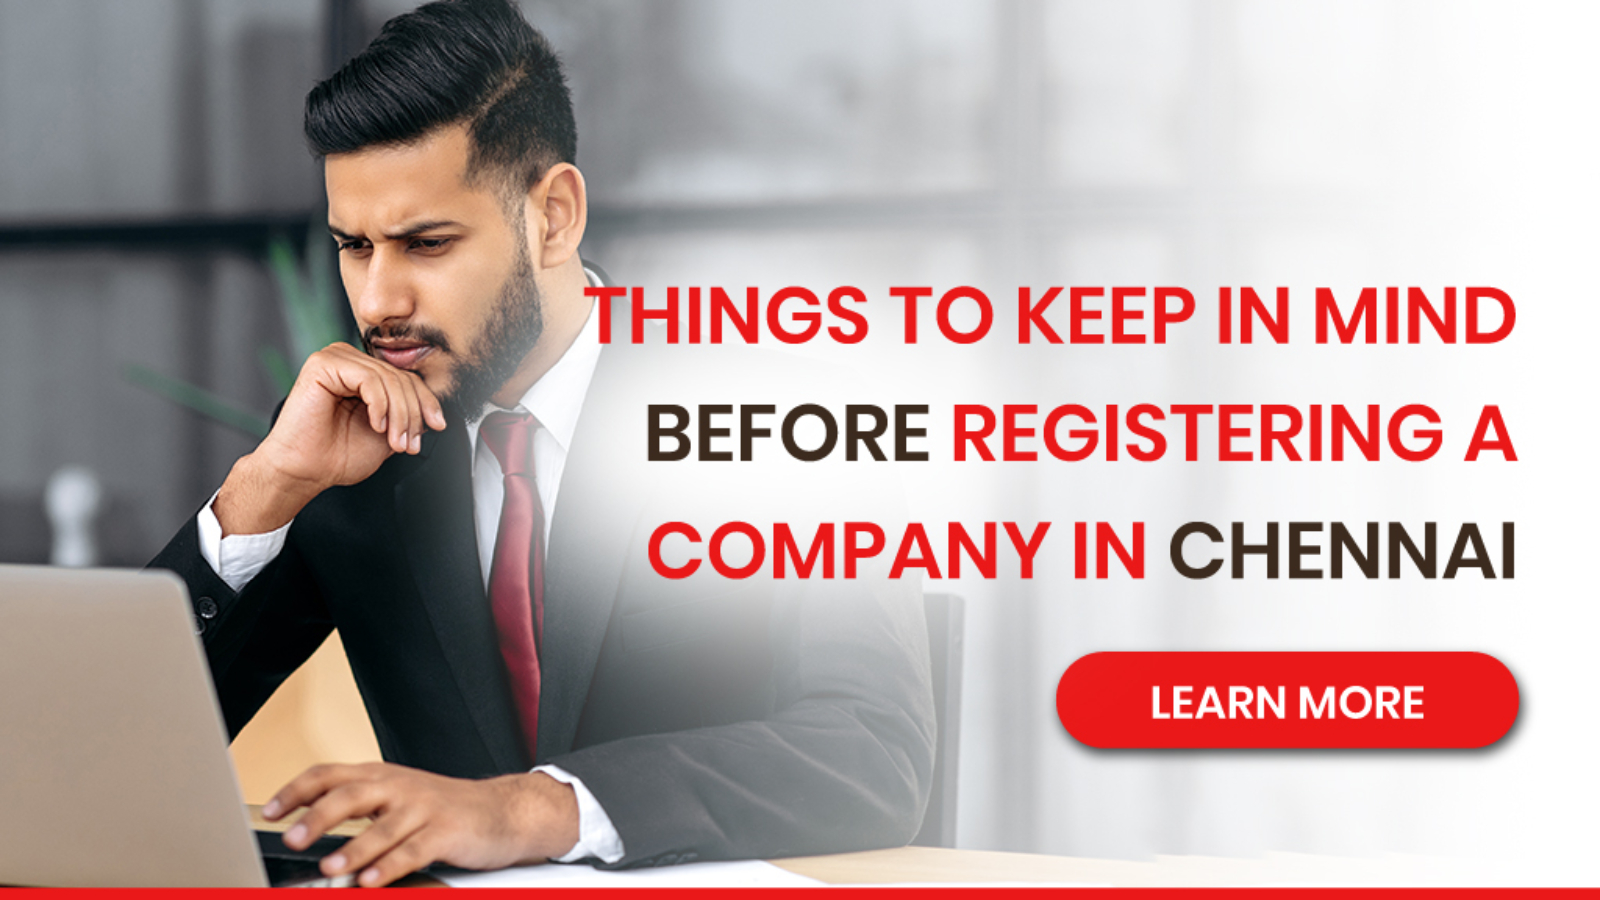 Things To Keep In Mind Before Registering a Company In Chennai